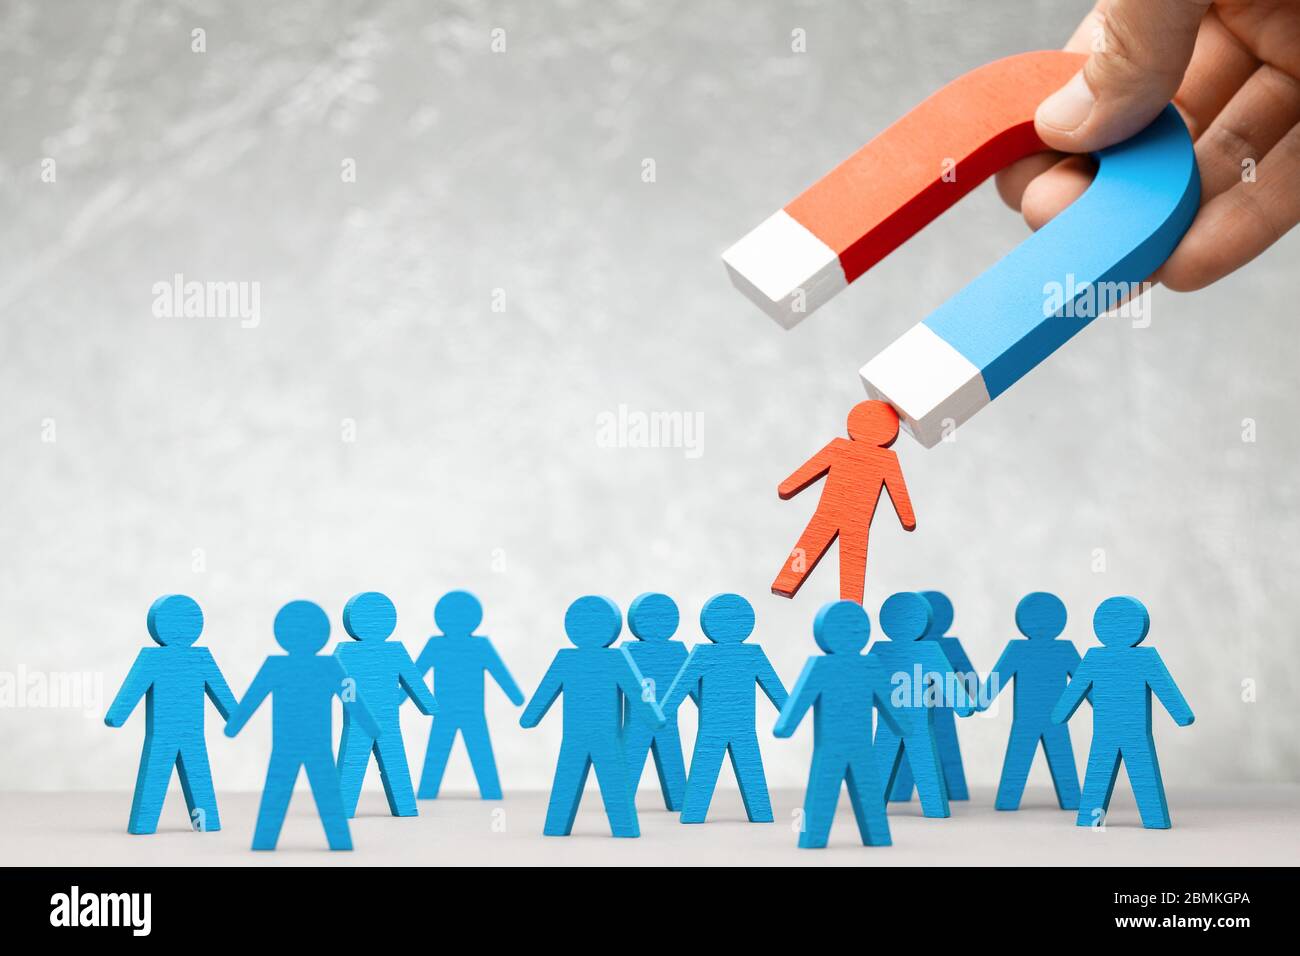 HR Magnet attracts staff leaders. Staff recruitment Stock Photo - Alamy